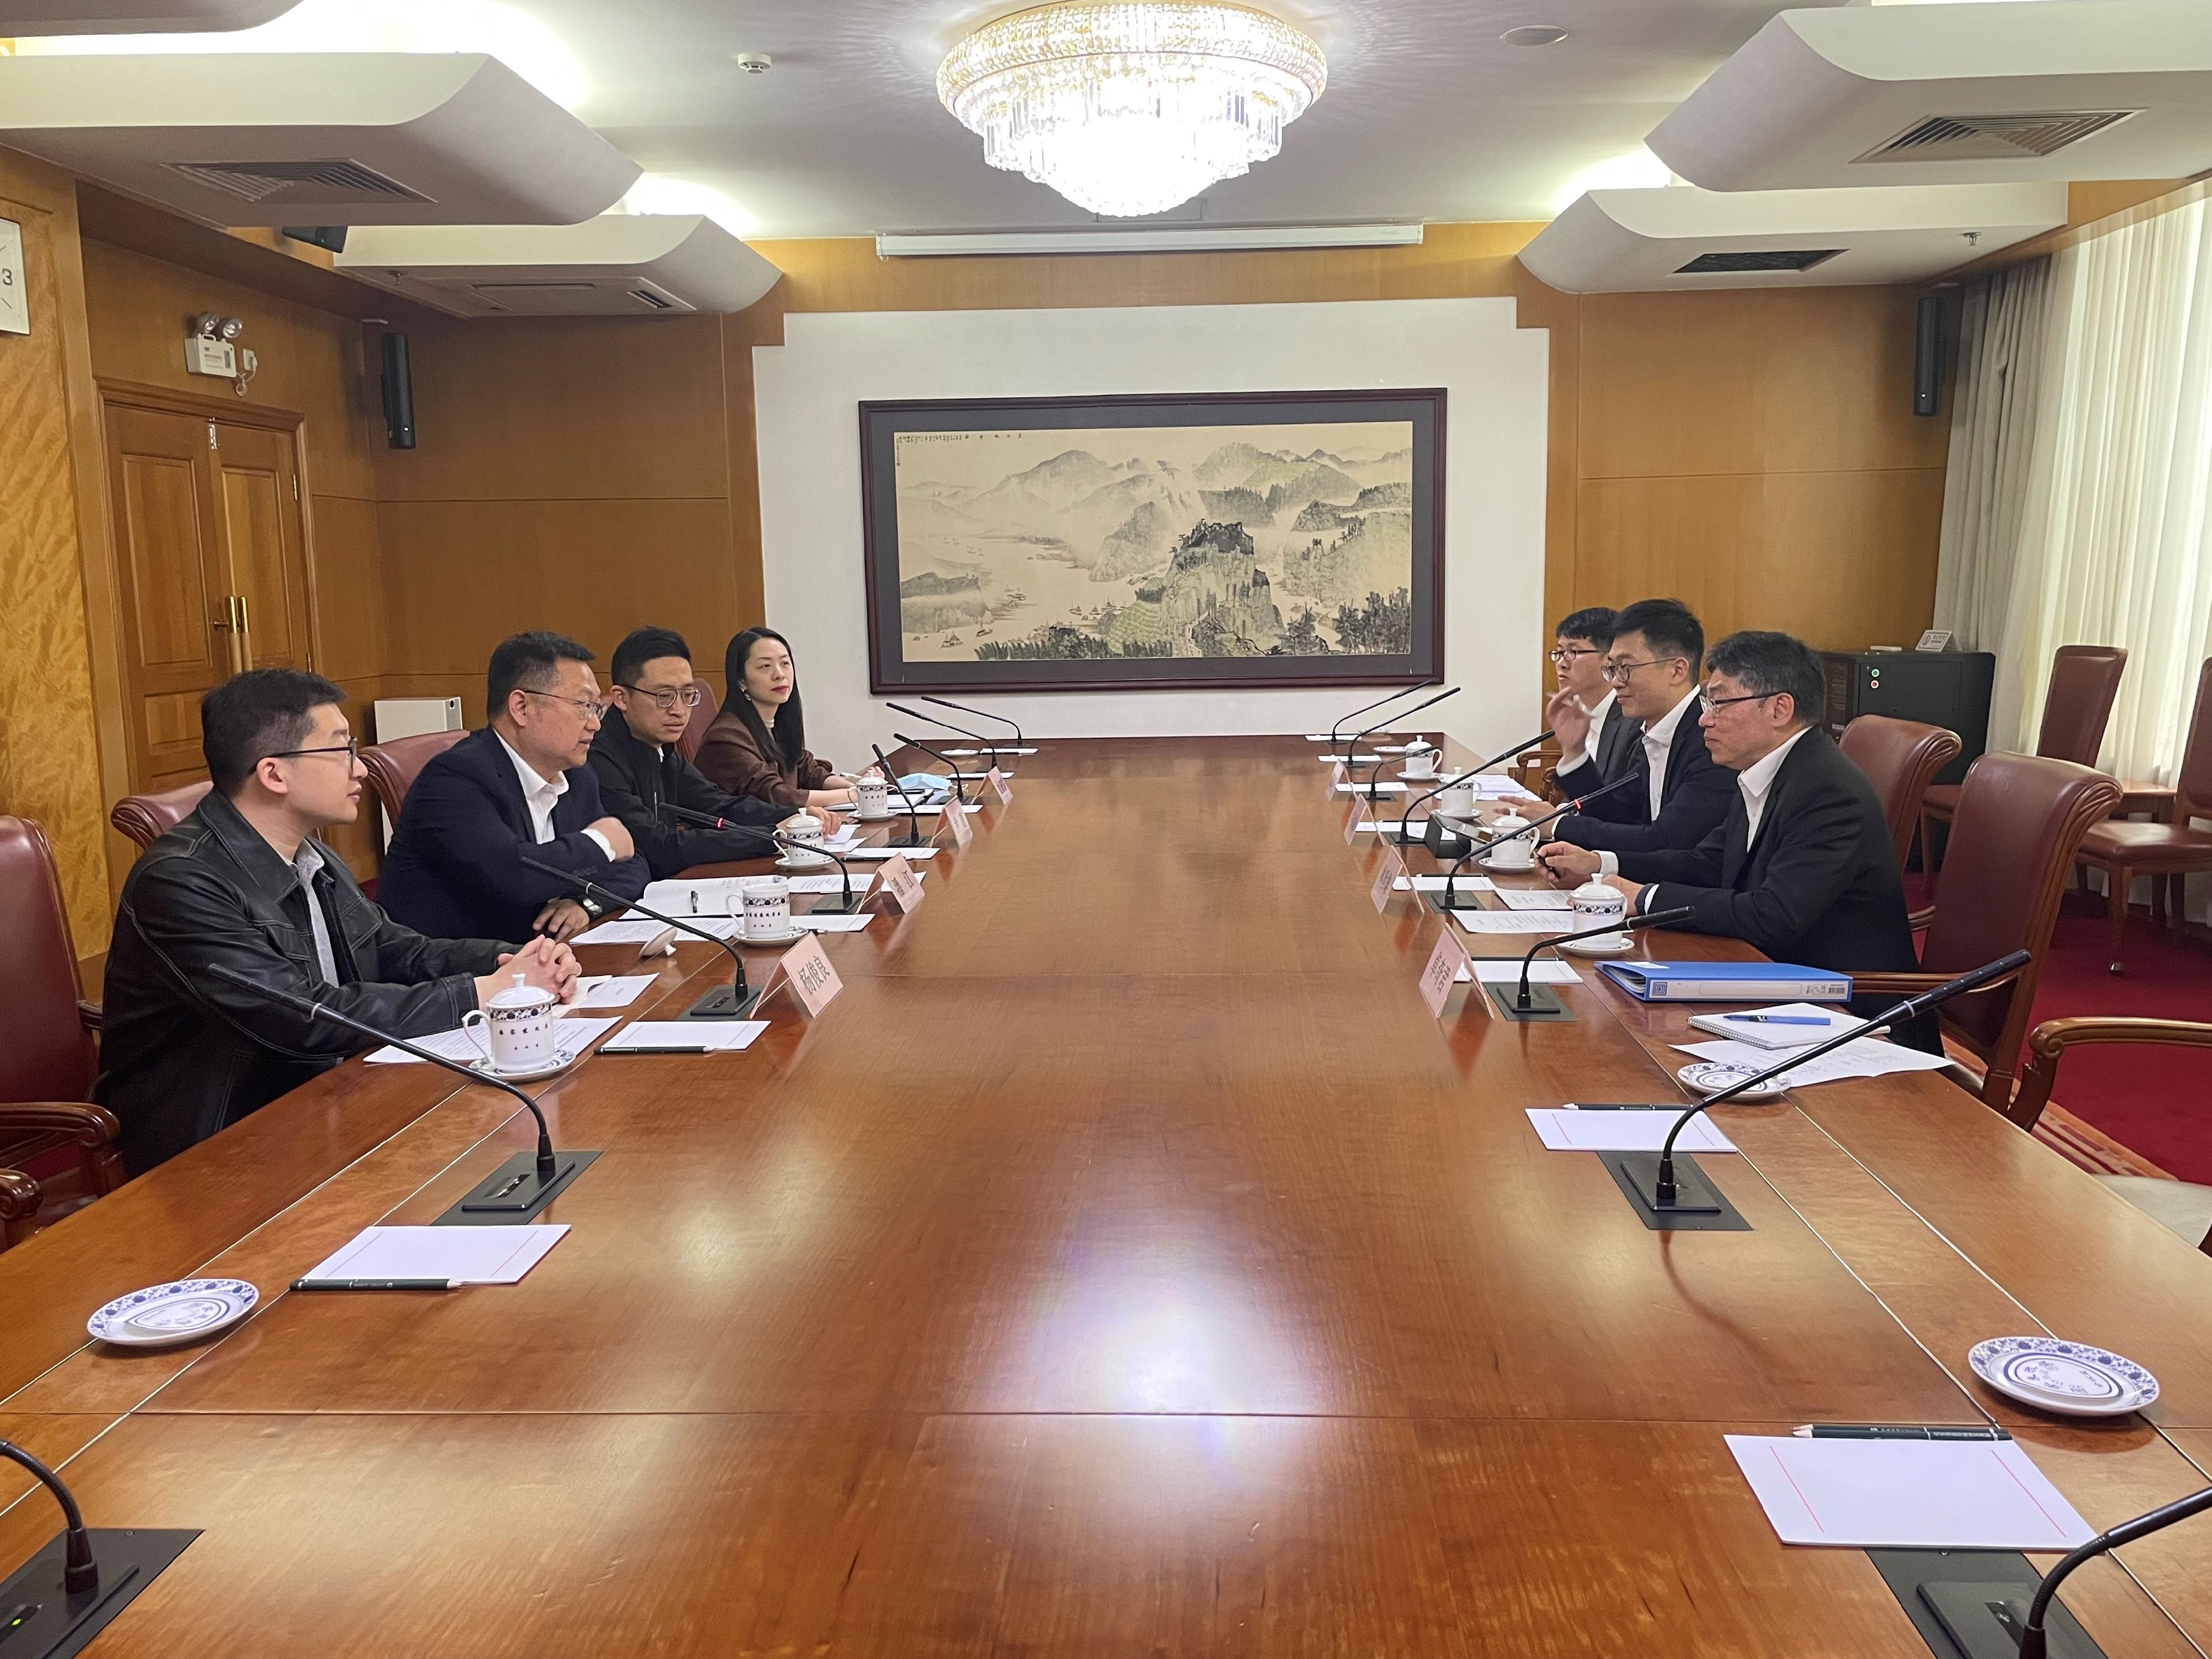 The Secretary for Transport and Logistics, Mr Lam Sai-hung (first right), today (April 19) visited the National Development and Reform Commission to meet with the Deputy Director-General of the International Cooperation Department, and Director General of International Affairs Department, Office of the Leading Group for Promoting the Belt and Road Initiative, Mr Pan Jiang (second left).